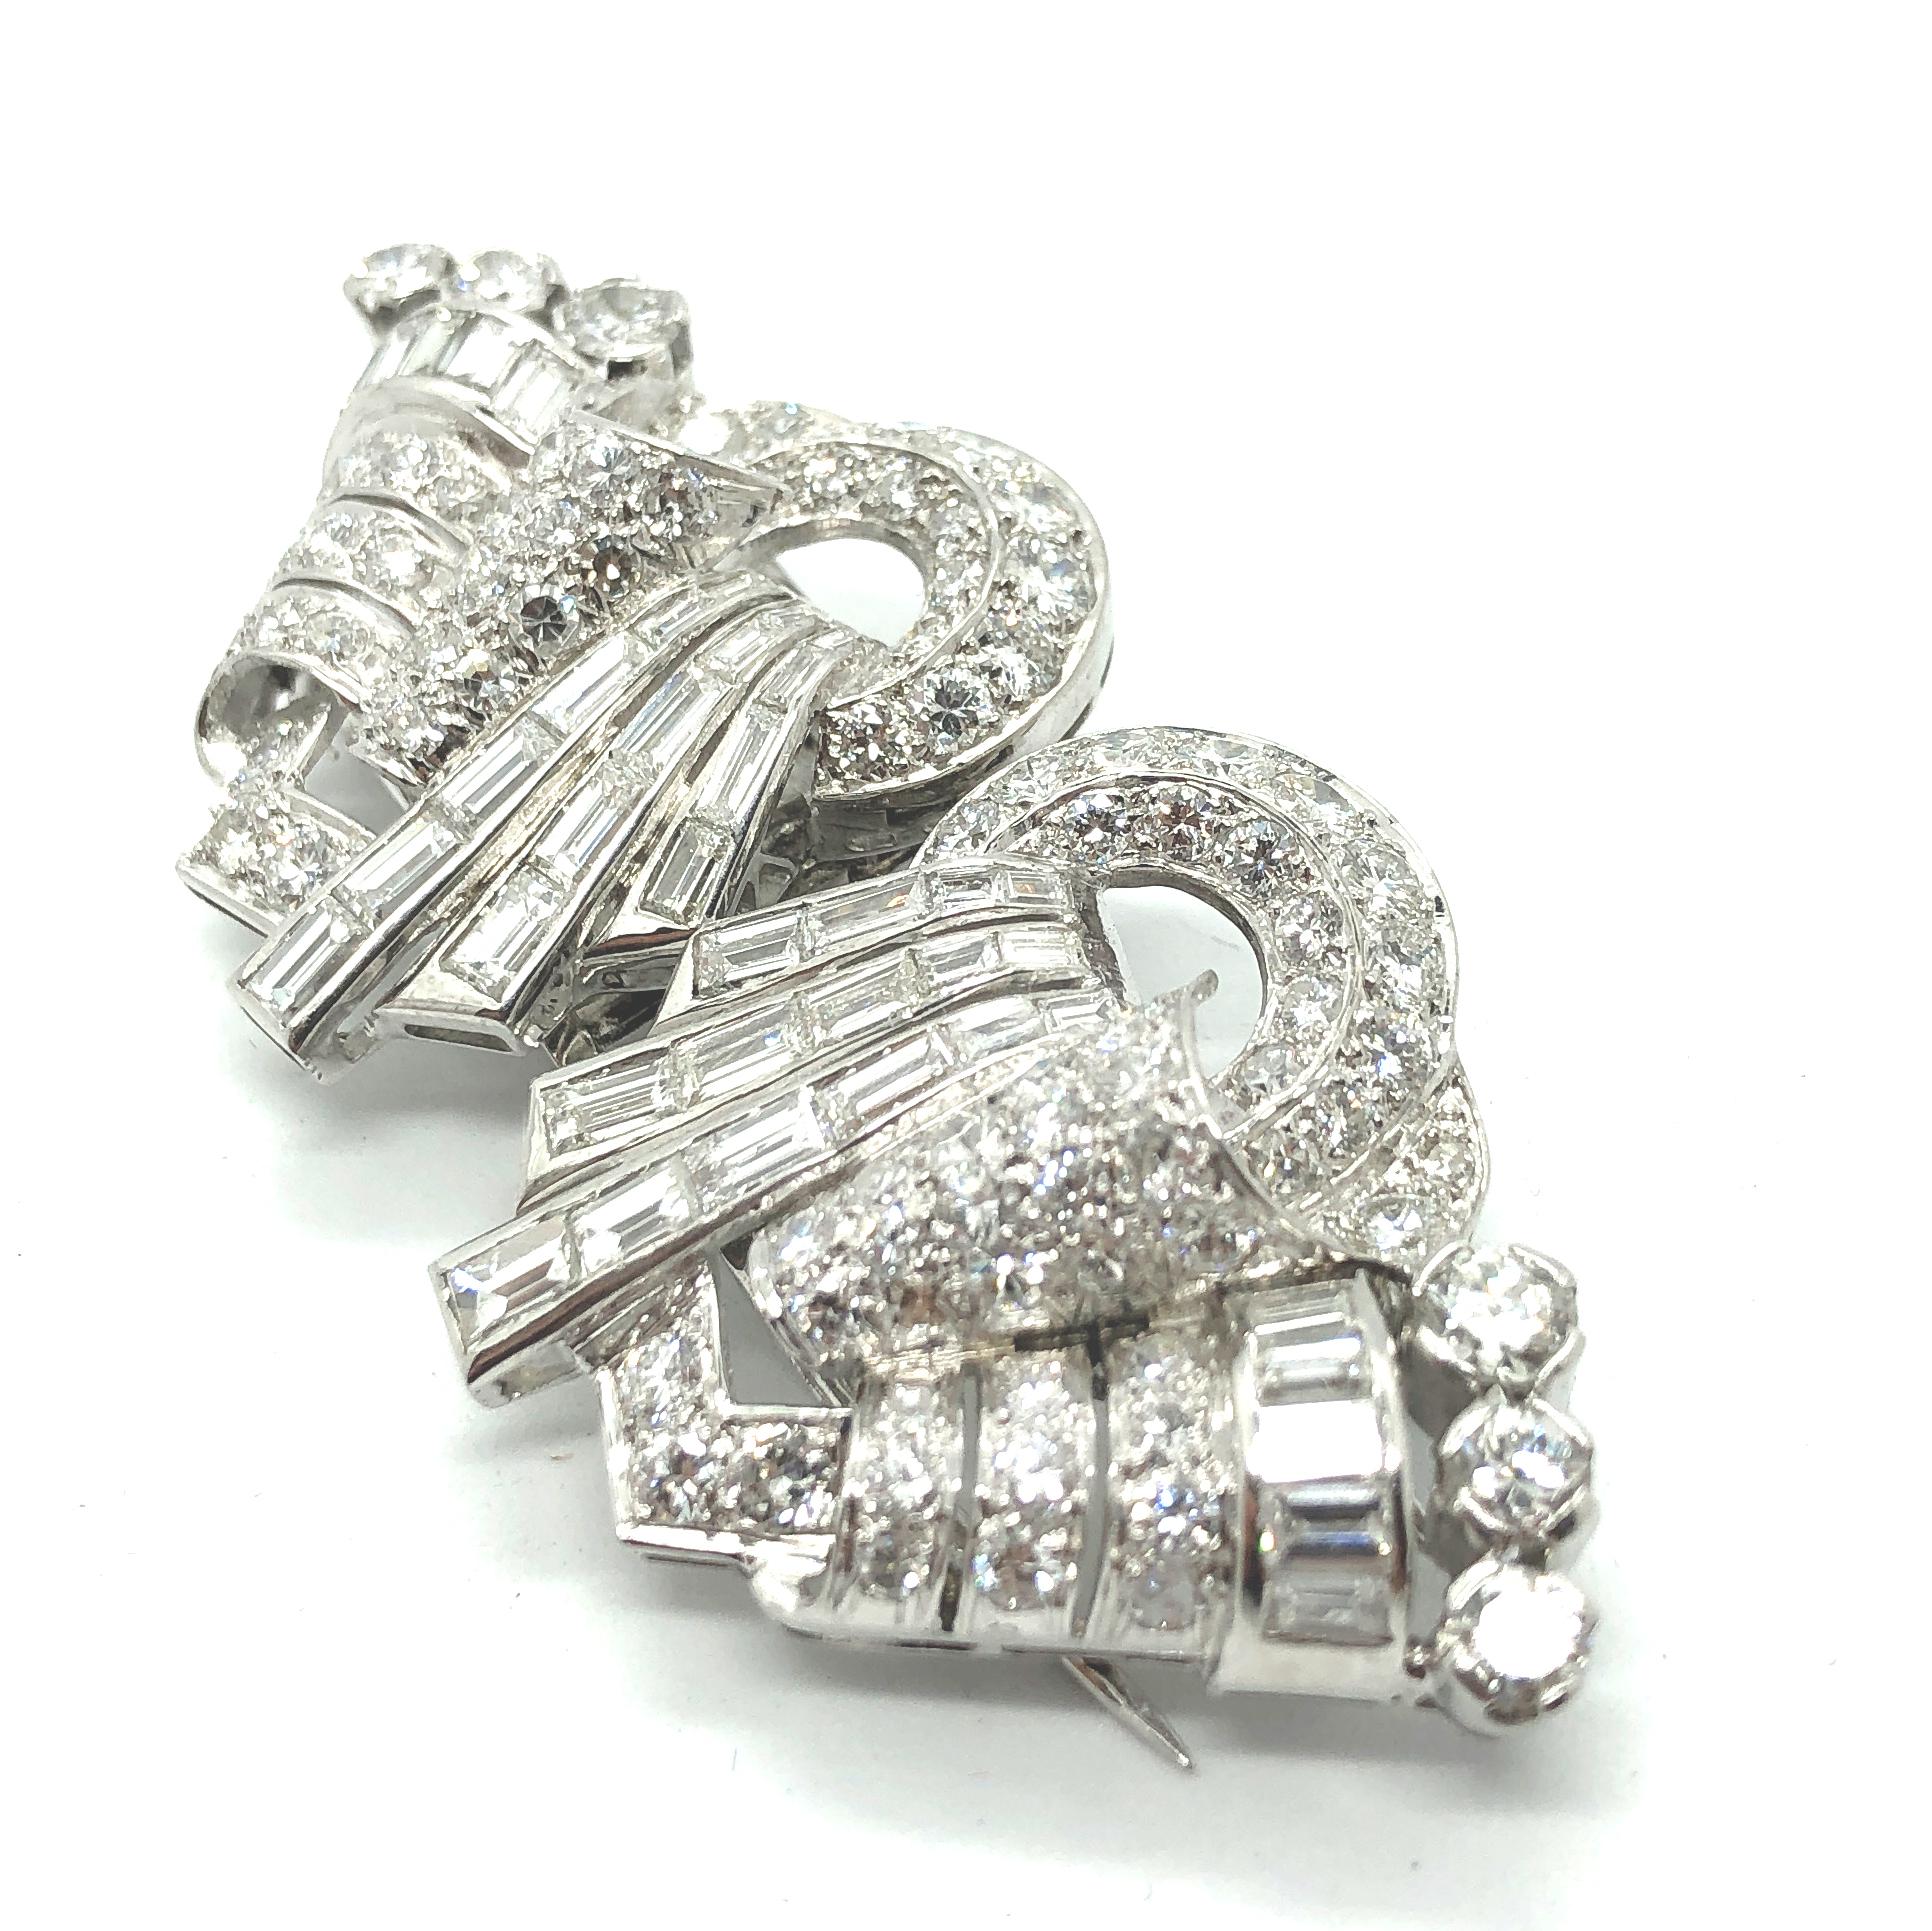 A diamond double clip brooch in platinum, Art Deco, ca. 1940s. The clips are set with round brilliant cut diamonds and diamond baguettes, following a very artistic design. The total diamond weight is circa 10 carats of very fine quality diamonds E/F